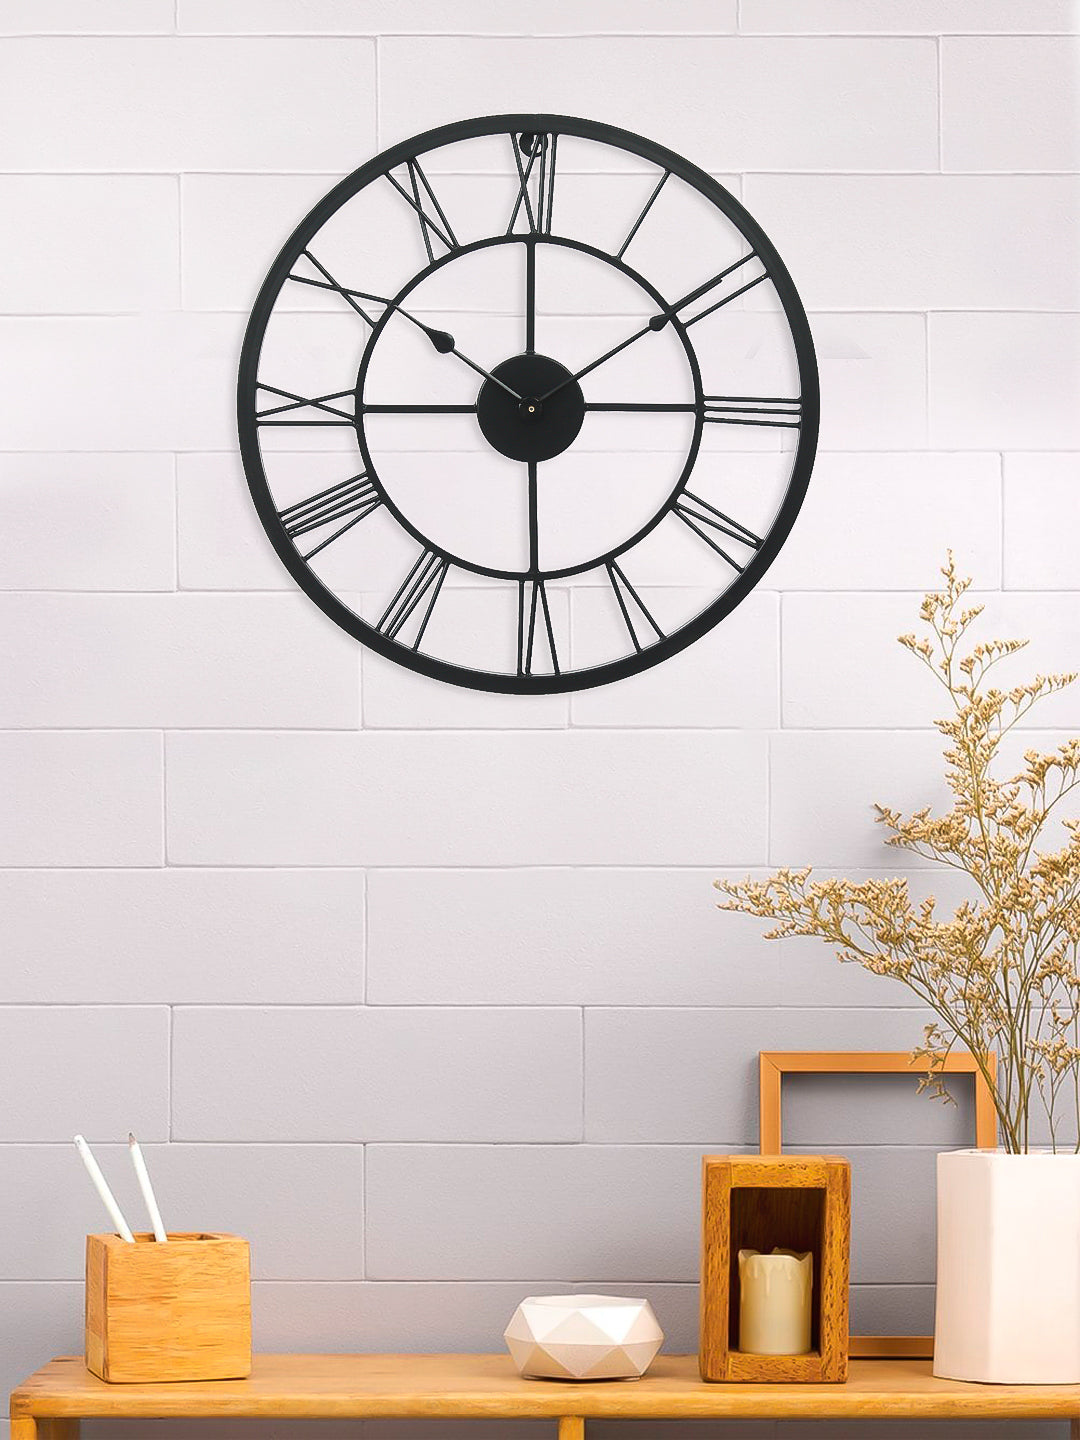 Black Iron Round Handcrafted Analog Roman Numeral Wall Clock Without Glass 1